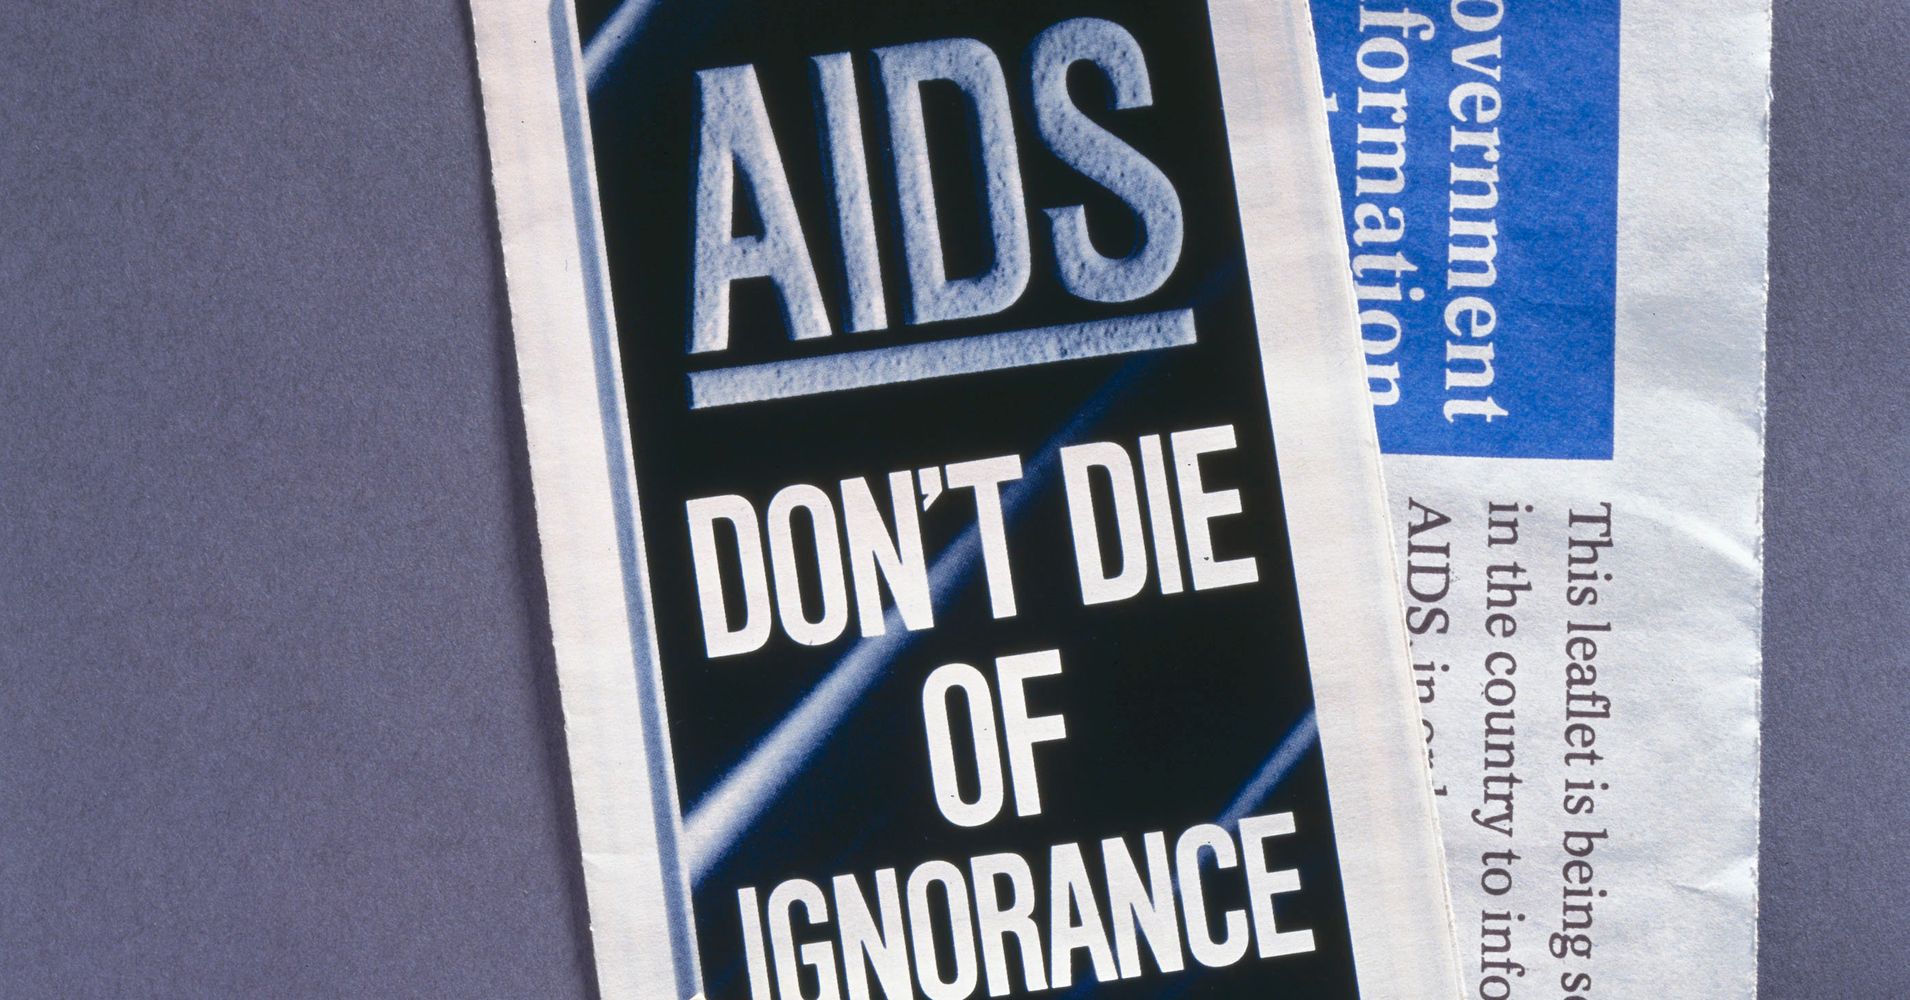 How Lesbians Role In The Aids Crisis Brought Gay Men And